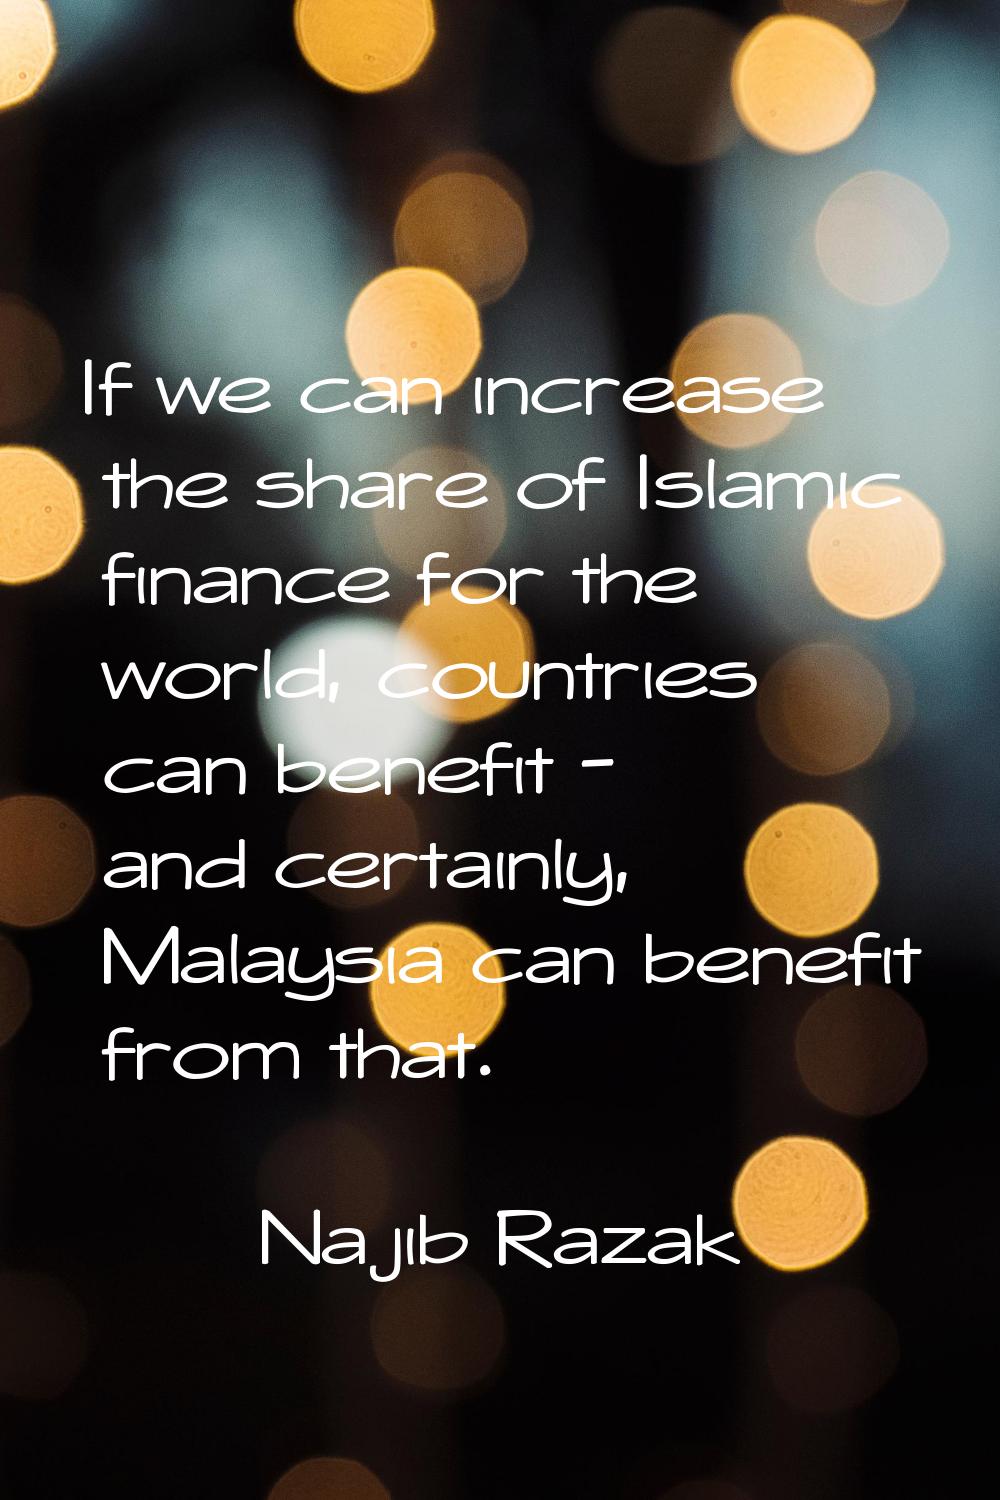 If we can increase the share of Islamic finance for the world, countries can benefit - and certainl